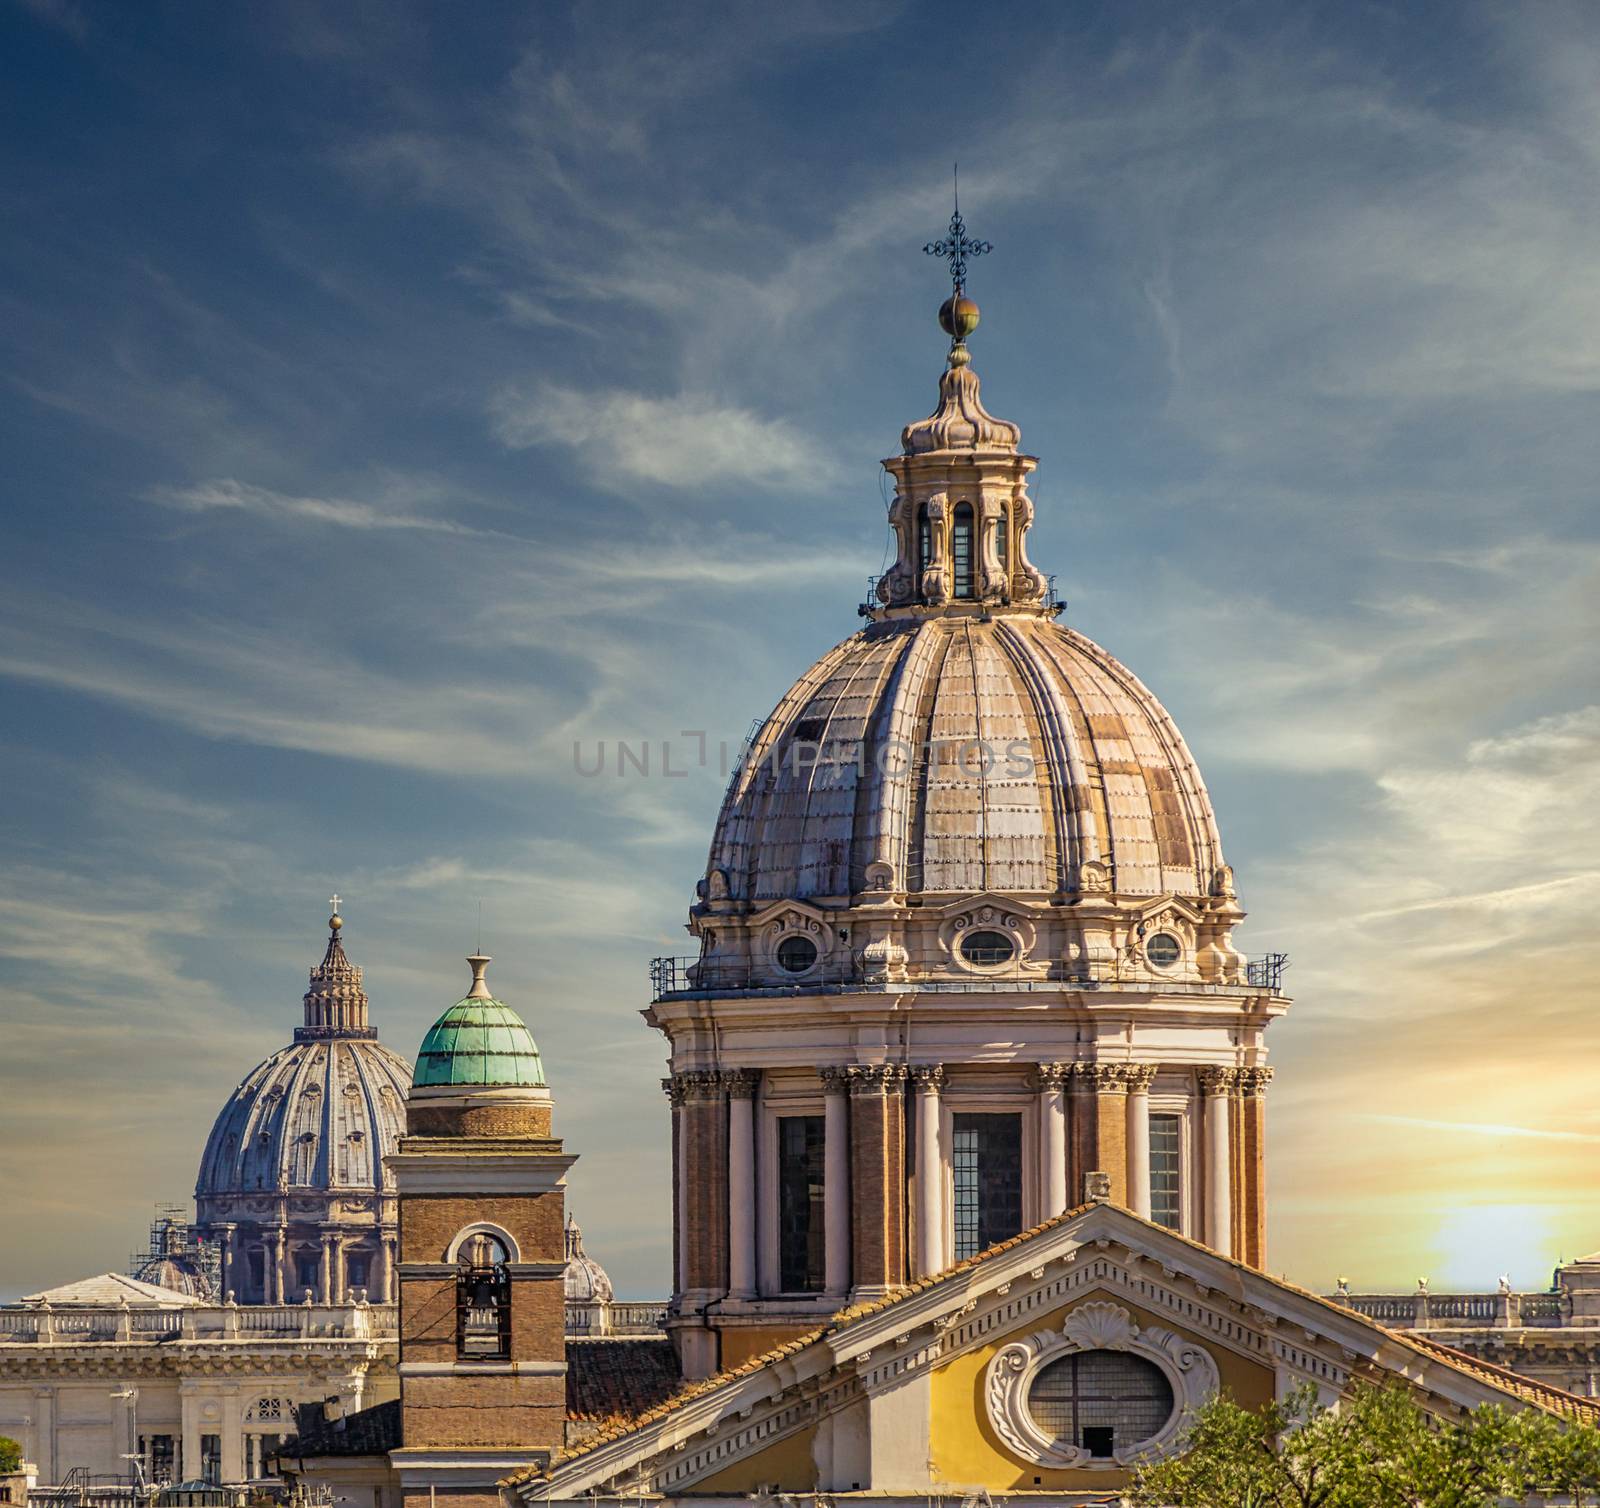 Three Domes in Rome at Dawn by dbvirago